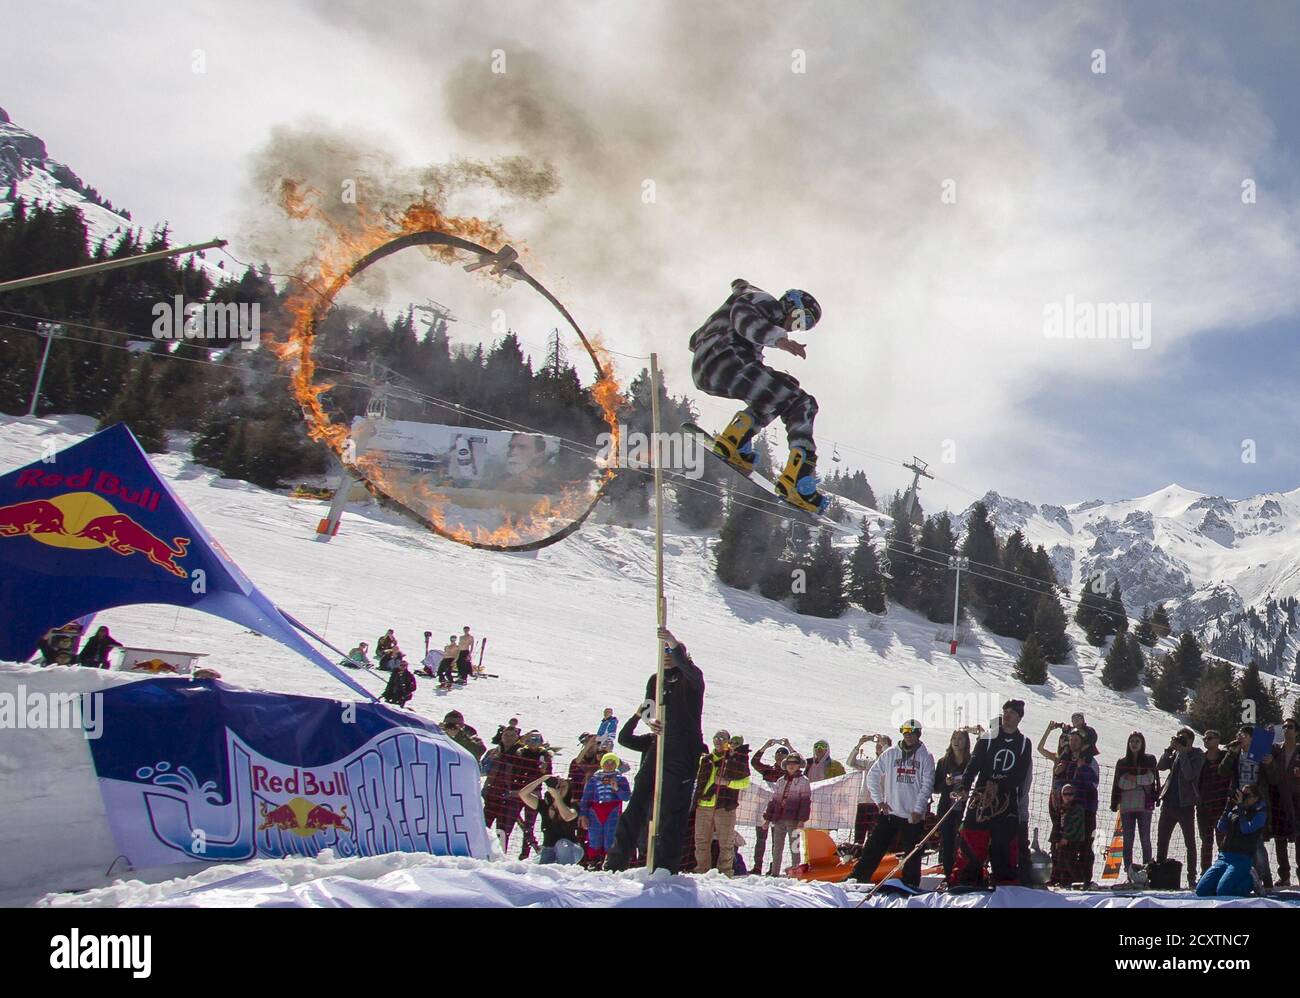 Uskyld overraskende Montgomery A snowboarder performs during the Red Bull Jump and Freeze competition at  ski resort Shimbulak outside Almaty March 22, 2015. Participants wearing  festive costumes perform tricks before getting into a pond with